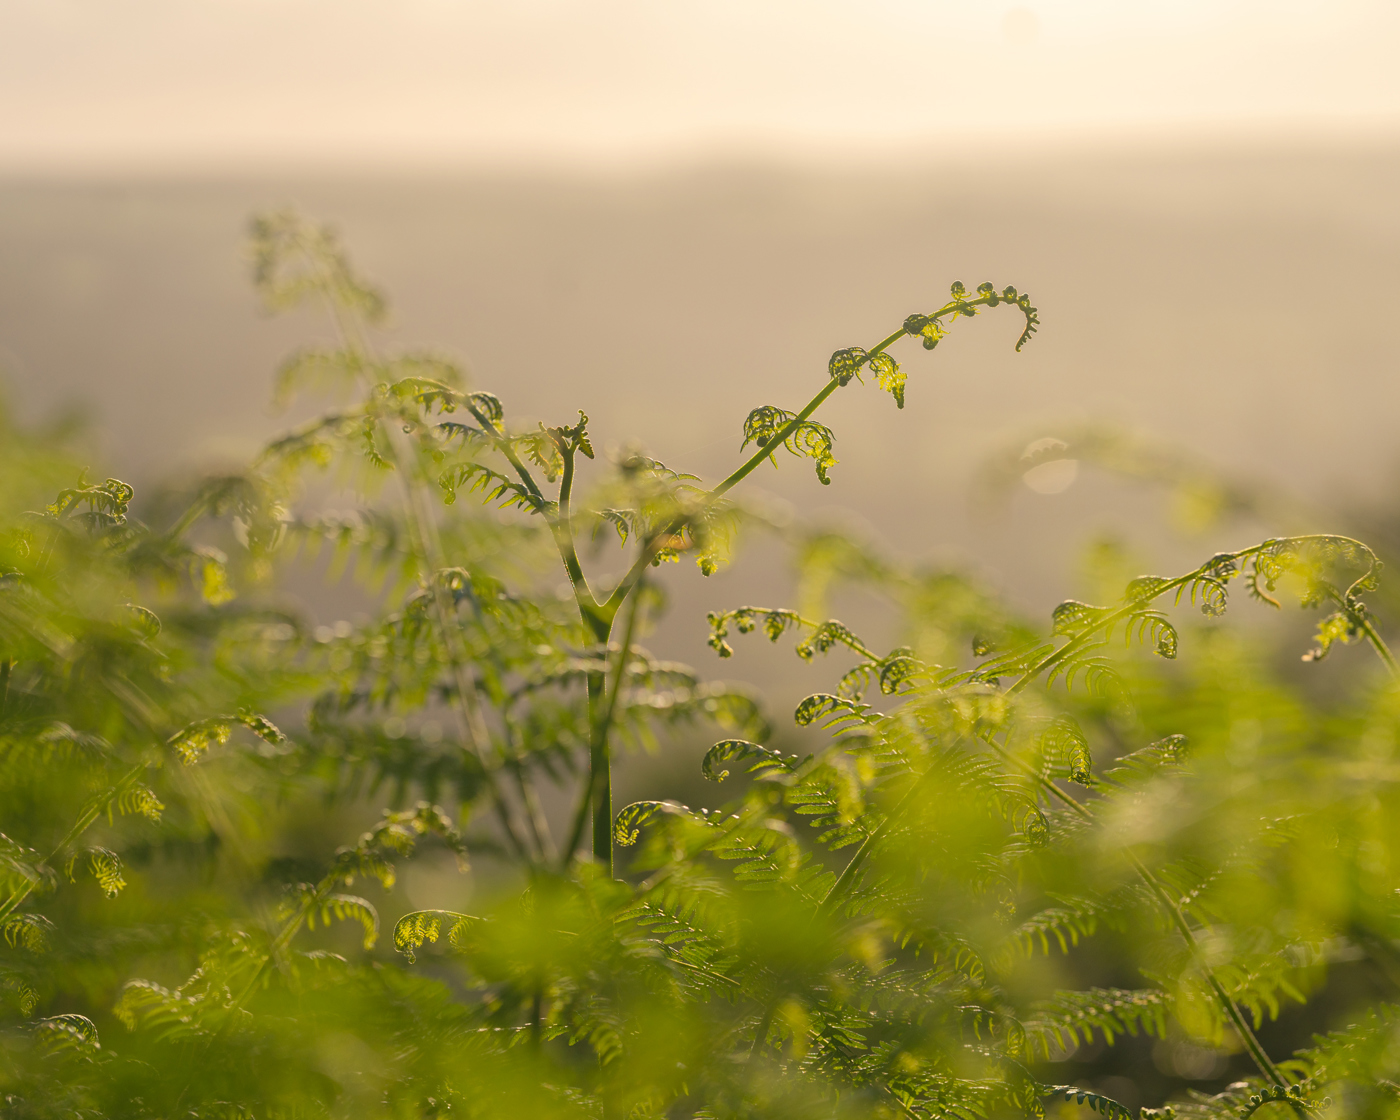 A dewy fern unfurls amidst a soft-focus backdrop of sun-drenched greenery in North Yorkshire. The warm light permeates the scene, imbuing a sense of early morning tranquility. a close up of a tree